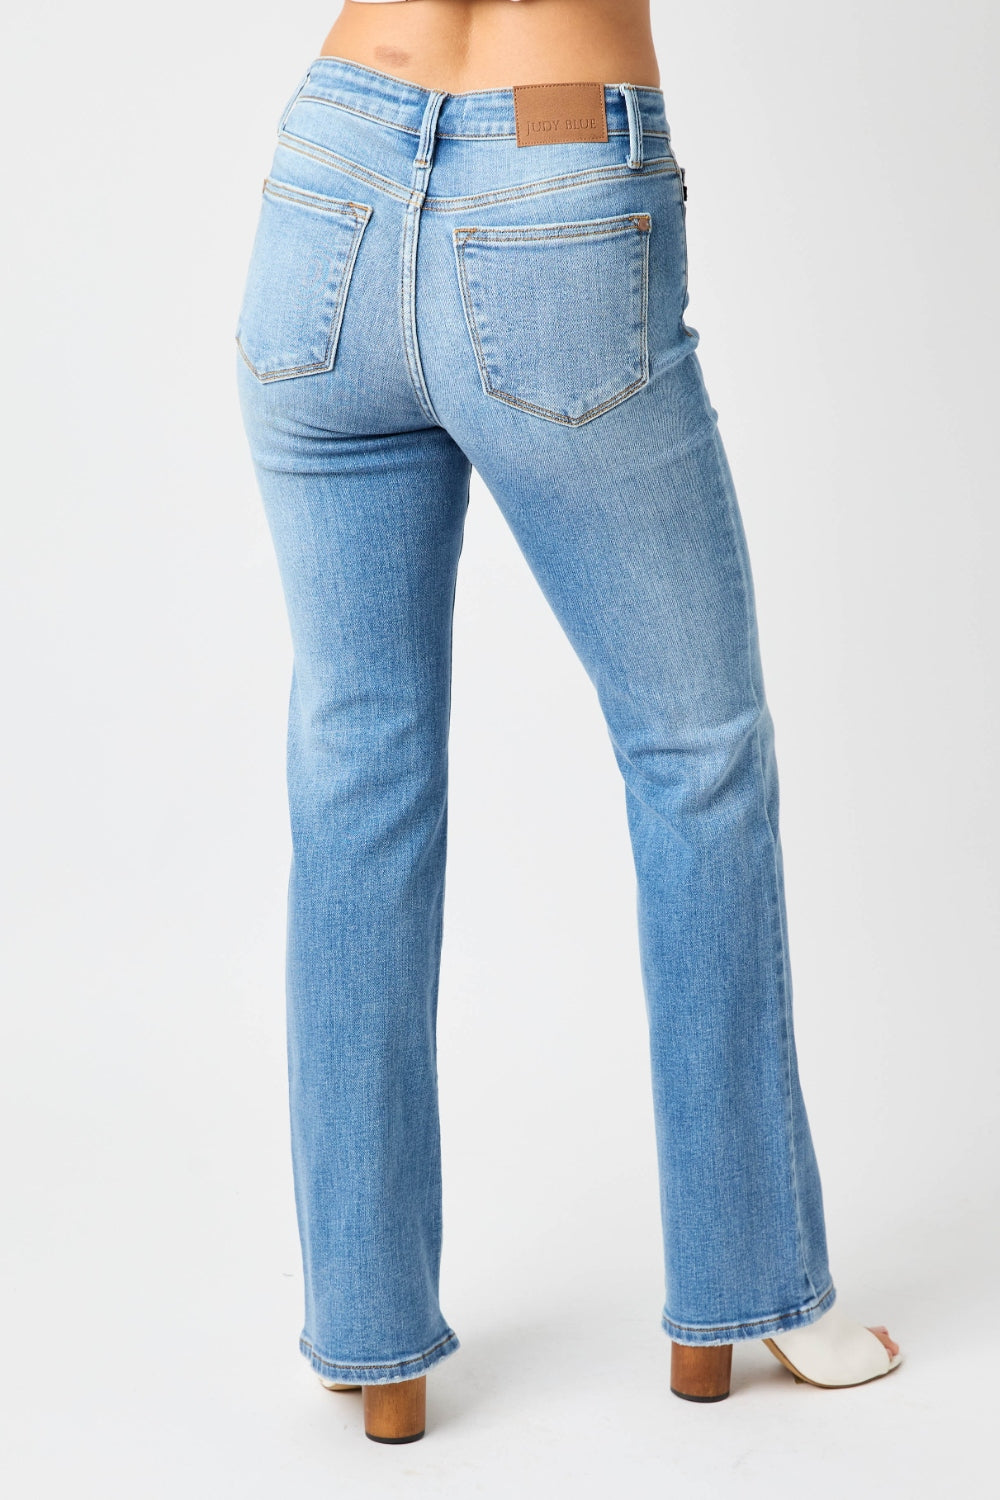 Judy Blue Full Size High Waist Straight Jeans - The Teal Antler Boutique